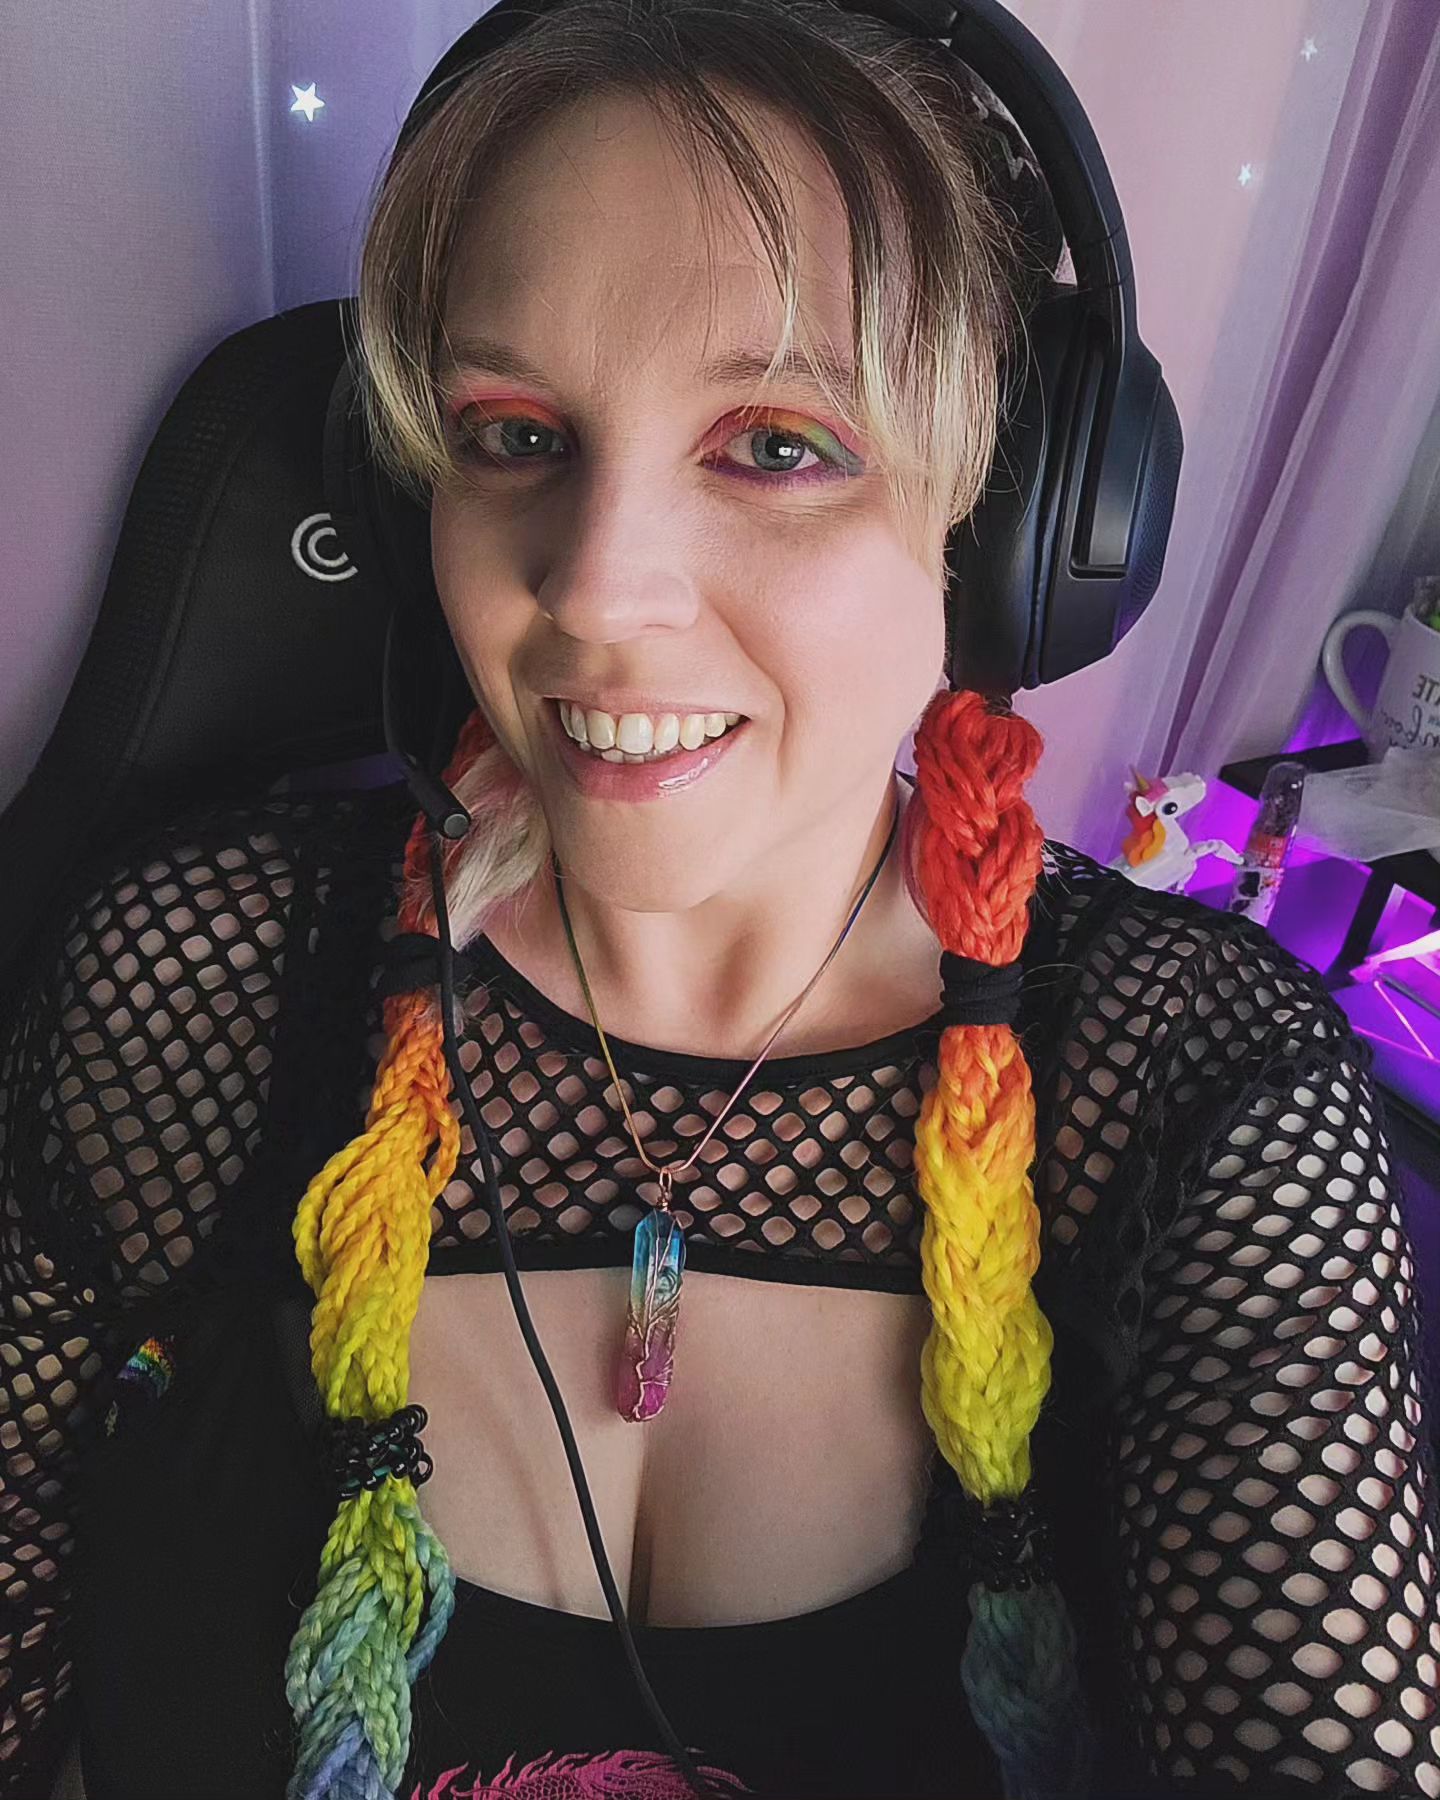 Continuing with the #valheim portal builds and some more exploring, stop by, say hi, hang out a bit 😀 💕

twitch.tv/katiesue1084 

💕❤️🧡💛💚💙💜💕

🦄
🌈
🦄
🌈
🦄
🌈
🦄

links in bio ❤️

#twitch #twitchaffiliate #supportsmallstreamers #smallstreamer #streamergirl #gaming #gamer #girlgamer #gamergirl #gamerlife #pcgaming #happy #positivevibes #instamood #cute #twitchgirls #thickwomen #rainbow #unicorn #bekind #bekindtoyourself